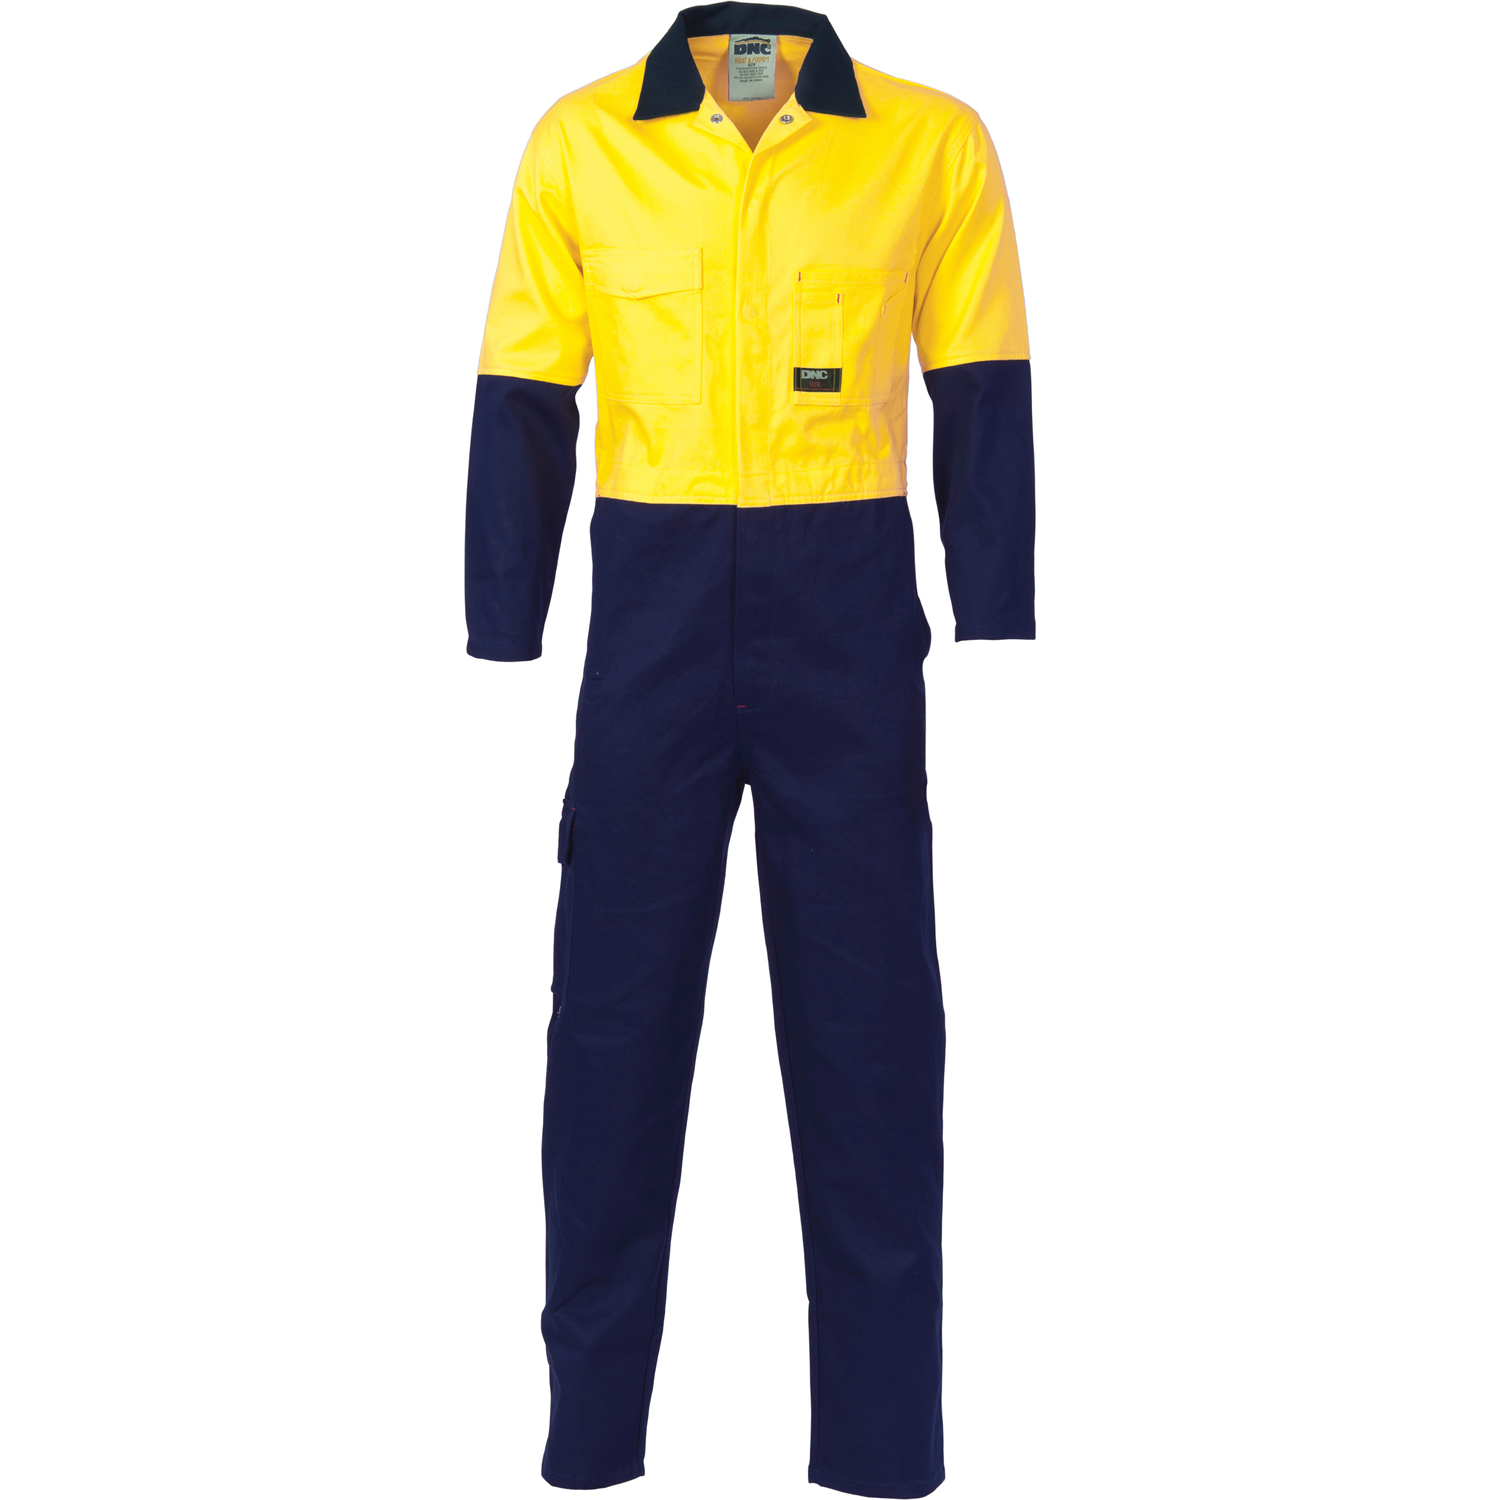 DNC 3851-311gsm HiVis Two Tone Cotton Drill Coverall 77-132S